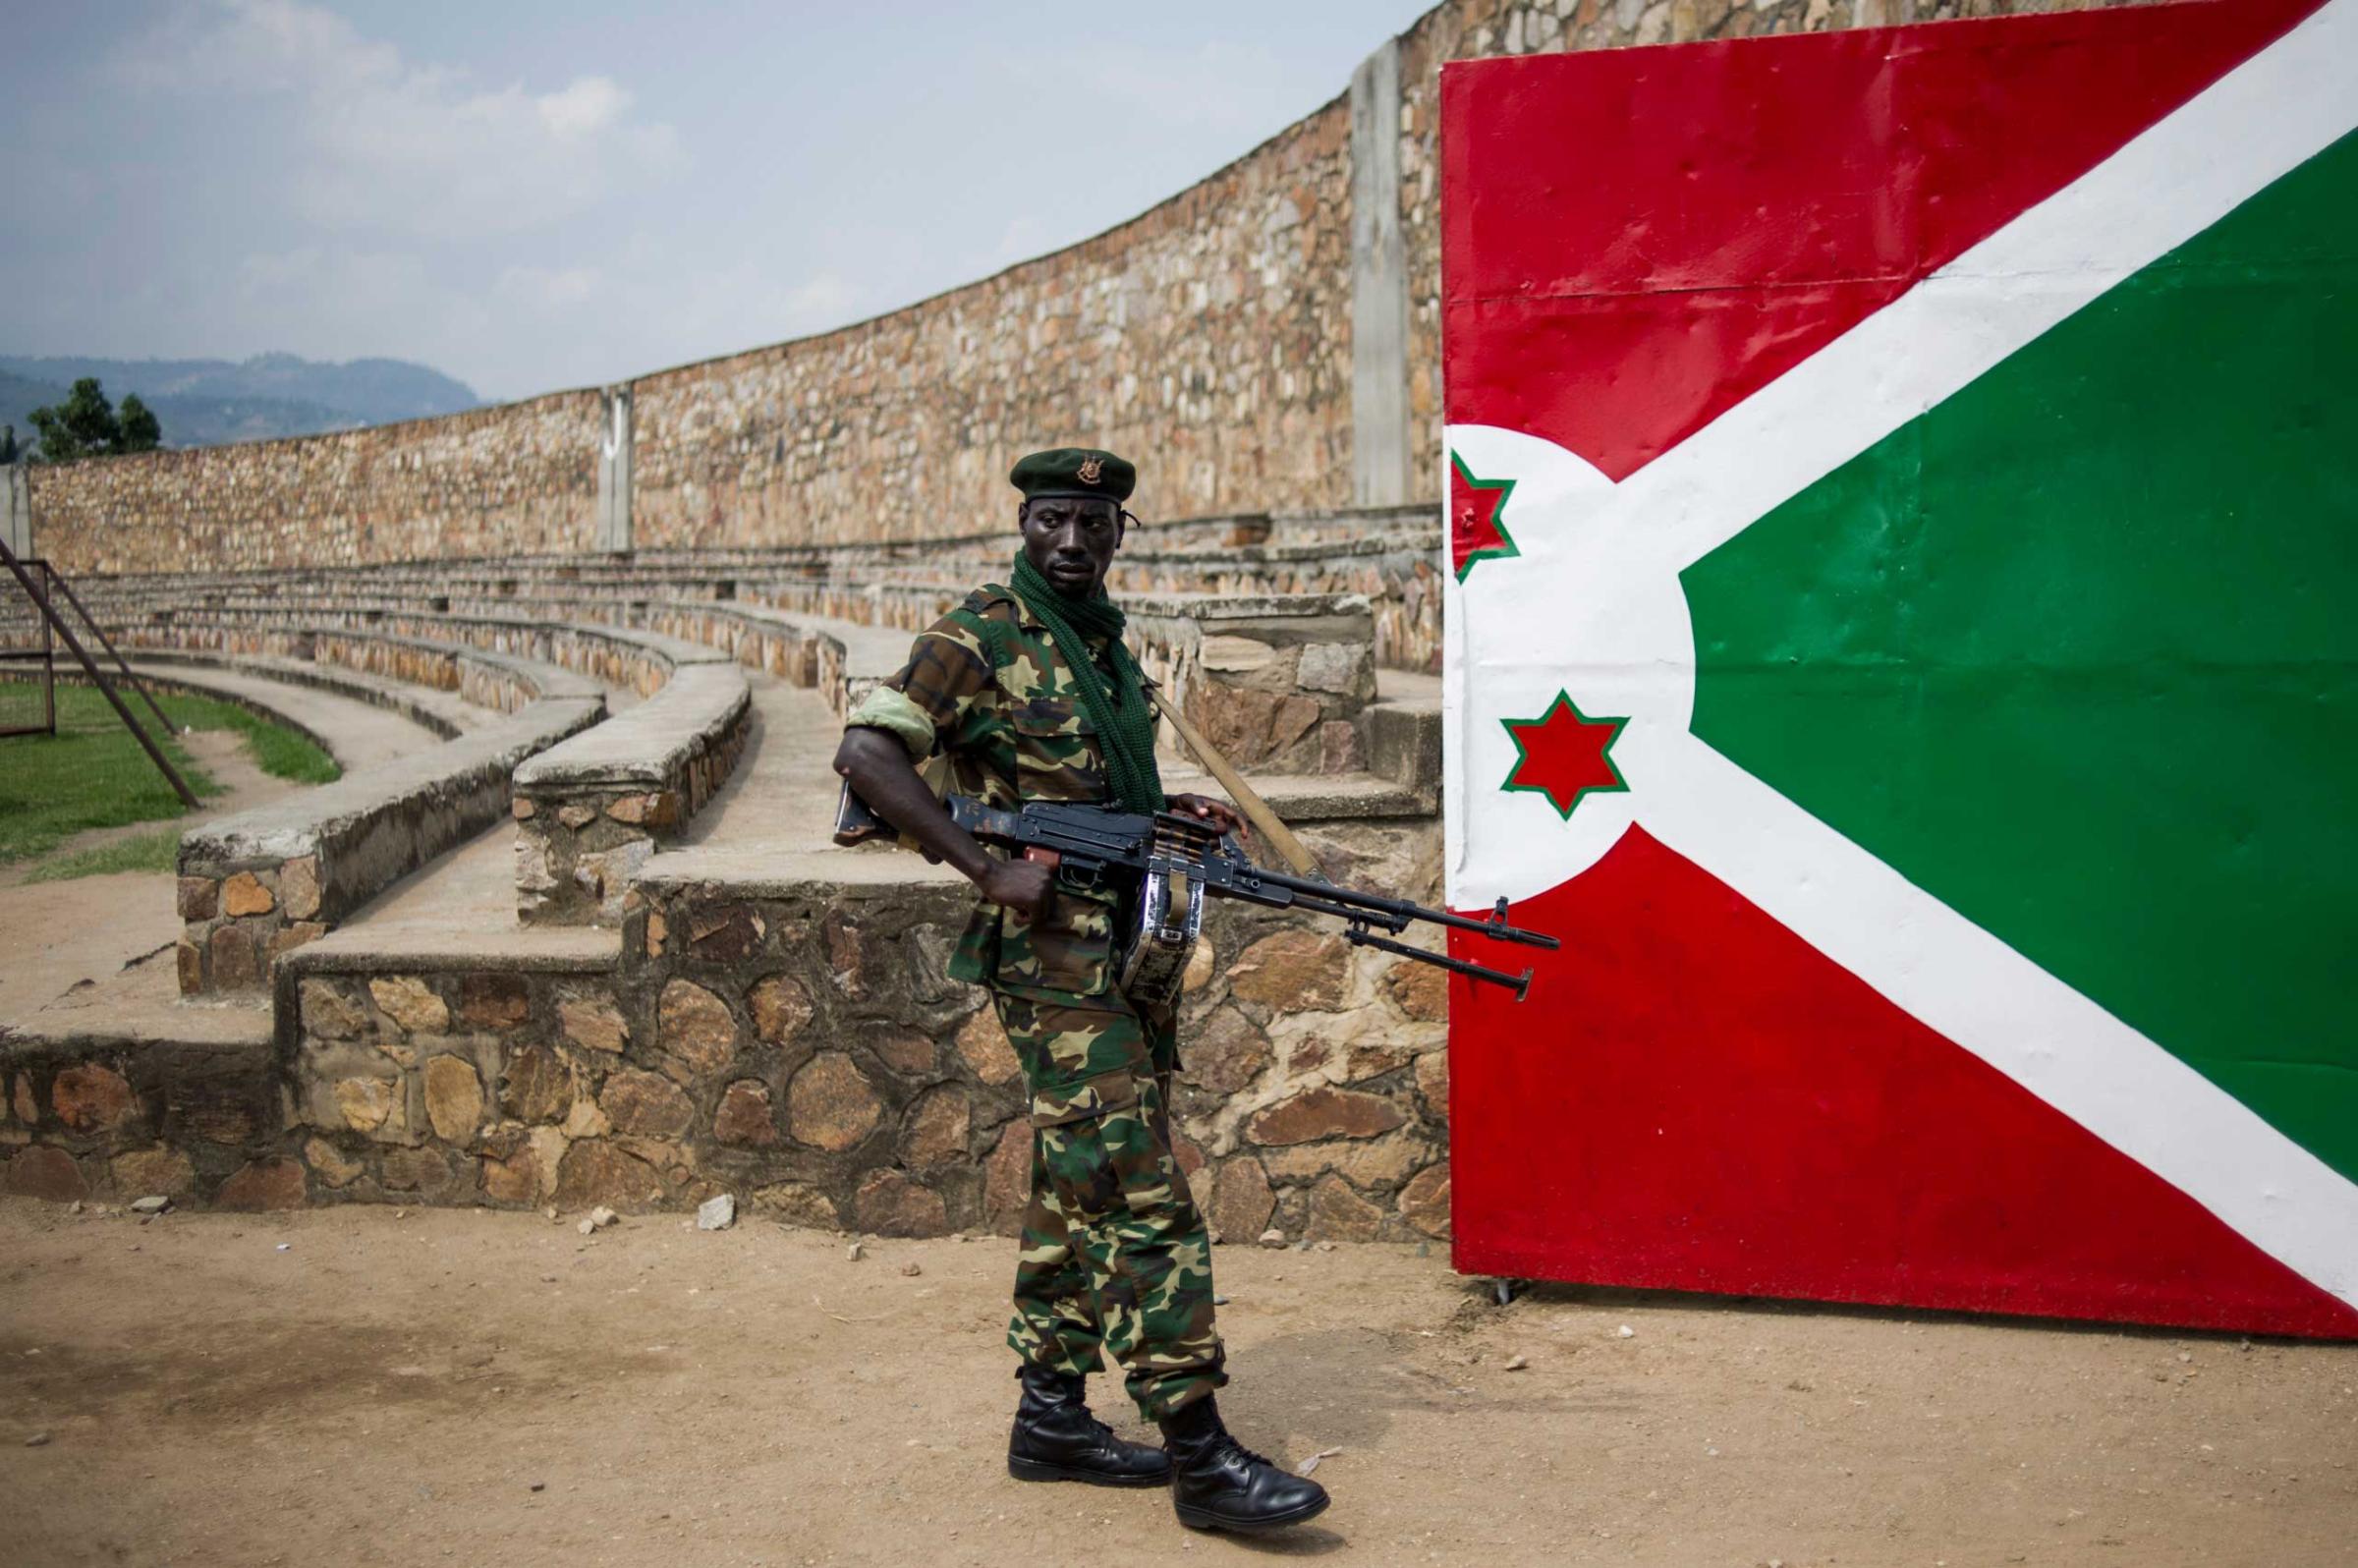 A soldier stands next to a gate painted with the Burundian flag at the Prince Rwagasore Stadium in Bujumbura, Burundi, on June 27, 2015, during rehearsals for Independence Day celebrations on July 1st. Since President Pierre Nkurunziza announced in April that he would stand for re-election, the country has been divided between loyalists and the opposition, and a split in the army has occured following the putsch attempt of mid-May.